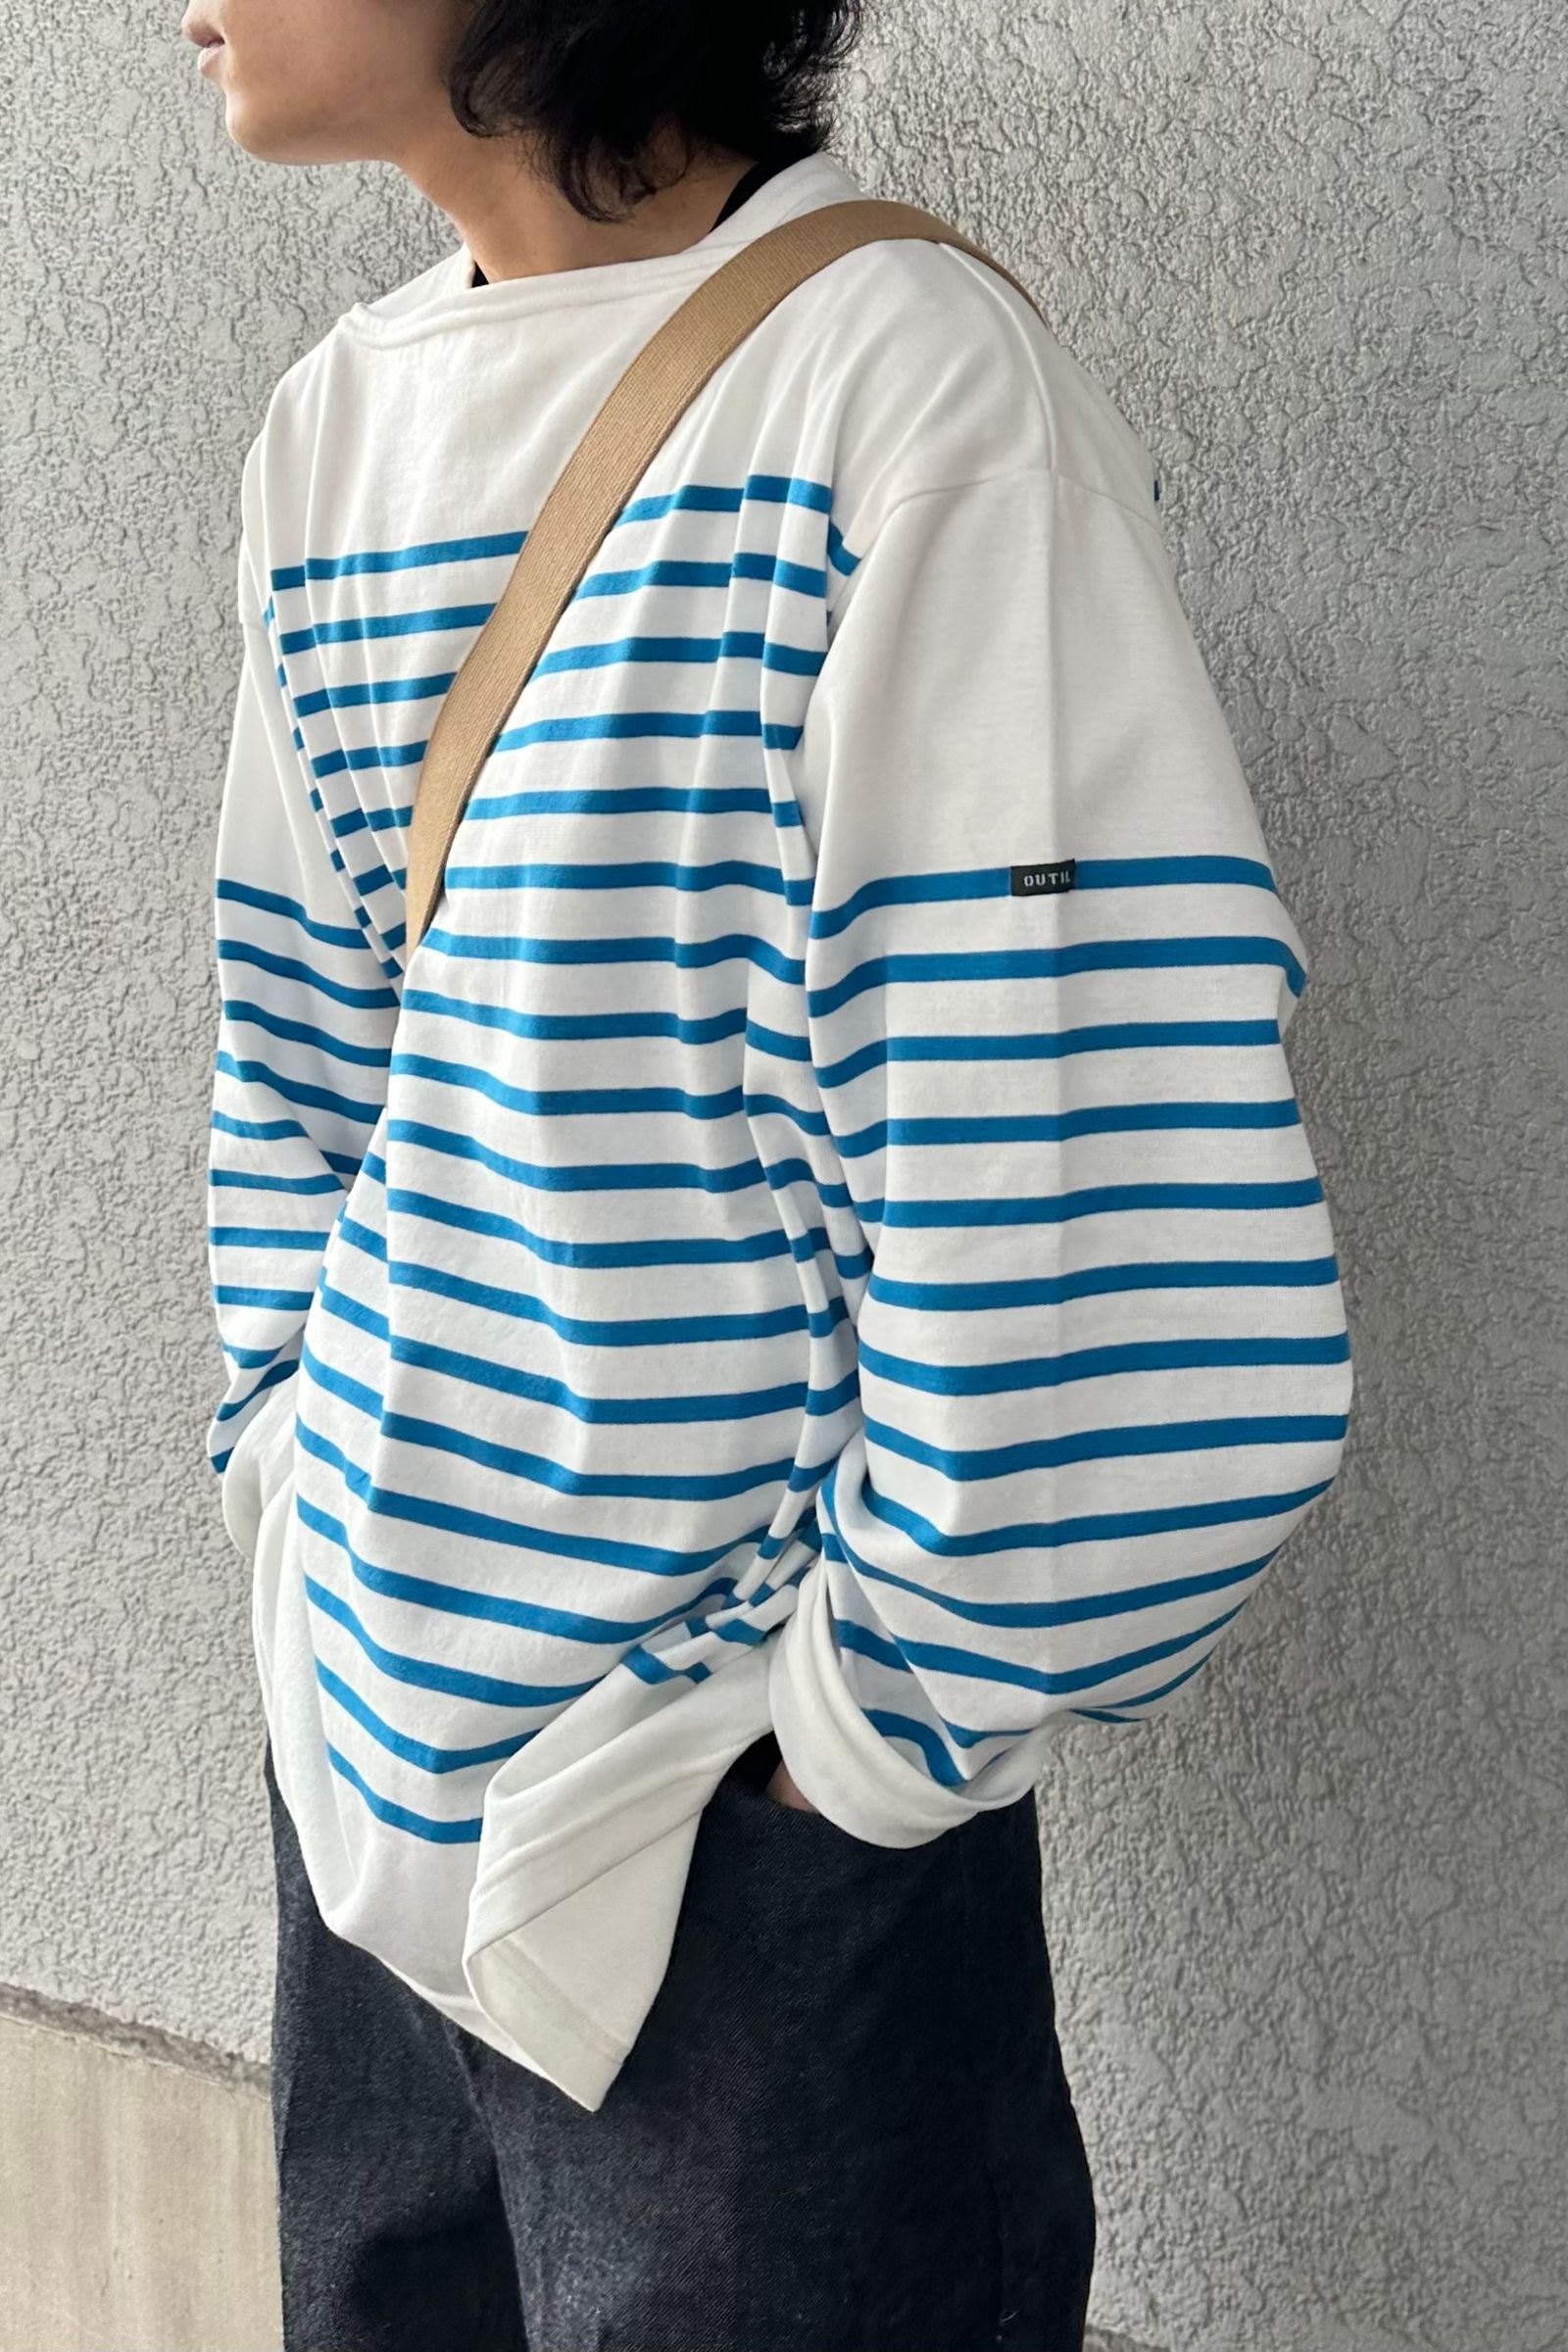 OUTIL - バスクシャツ/tricot aast -OFF/INDIGO BUNTING- 24ss 